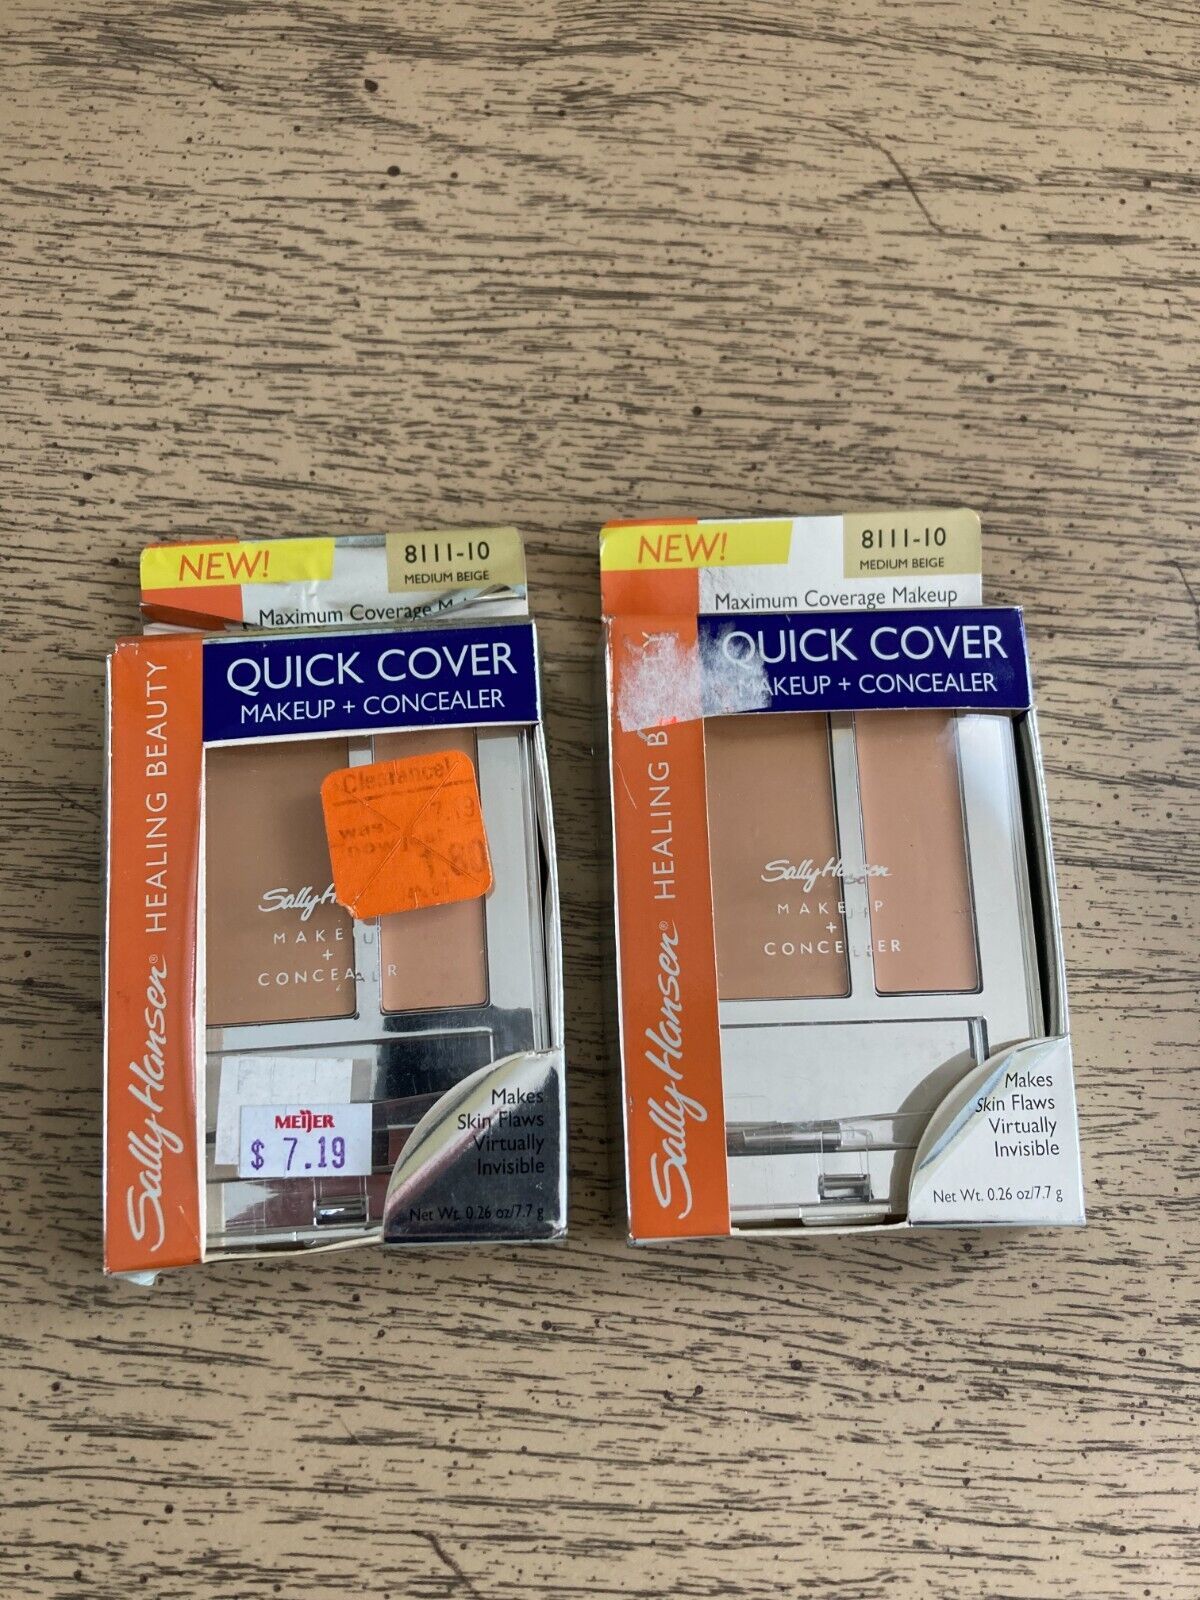 Primary image for Sally Hansen Quick Cover Make Up + Concealer #8111-10 Medium Beige Lot of 2